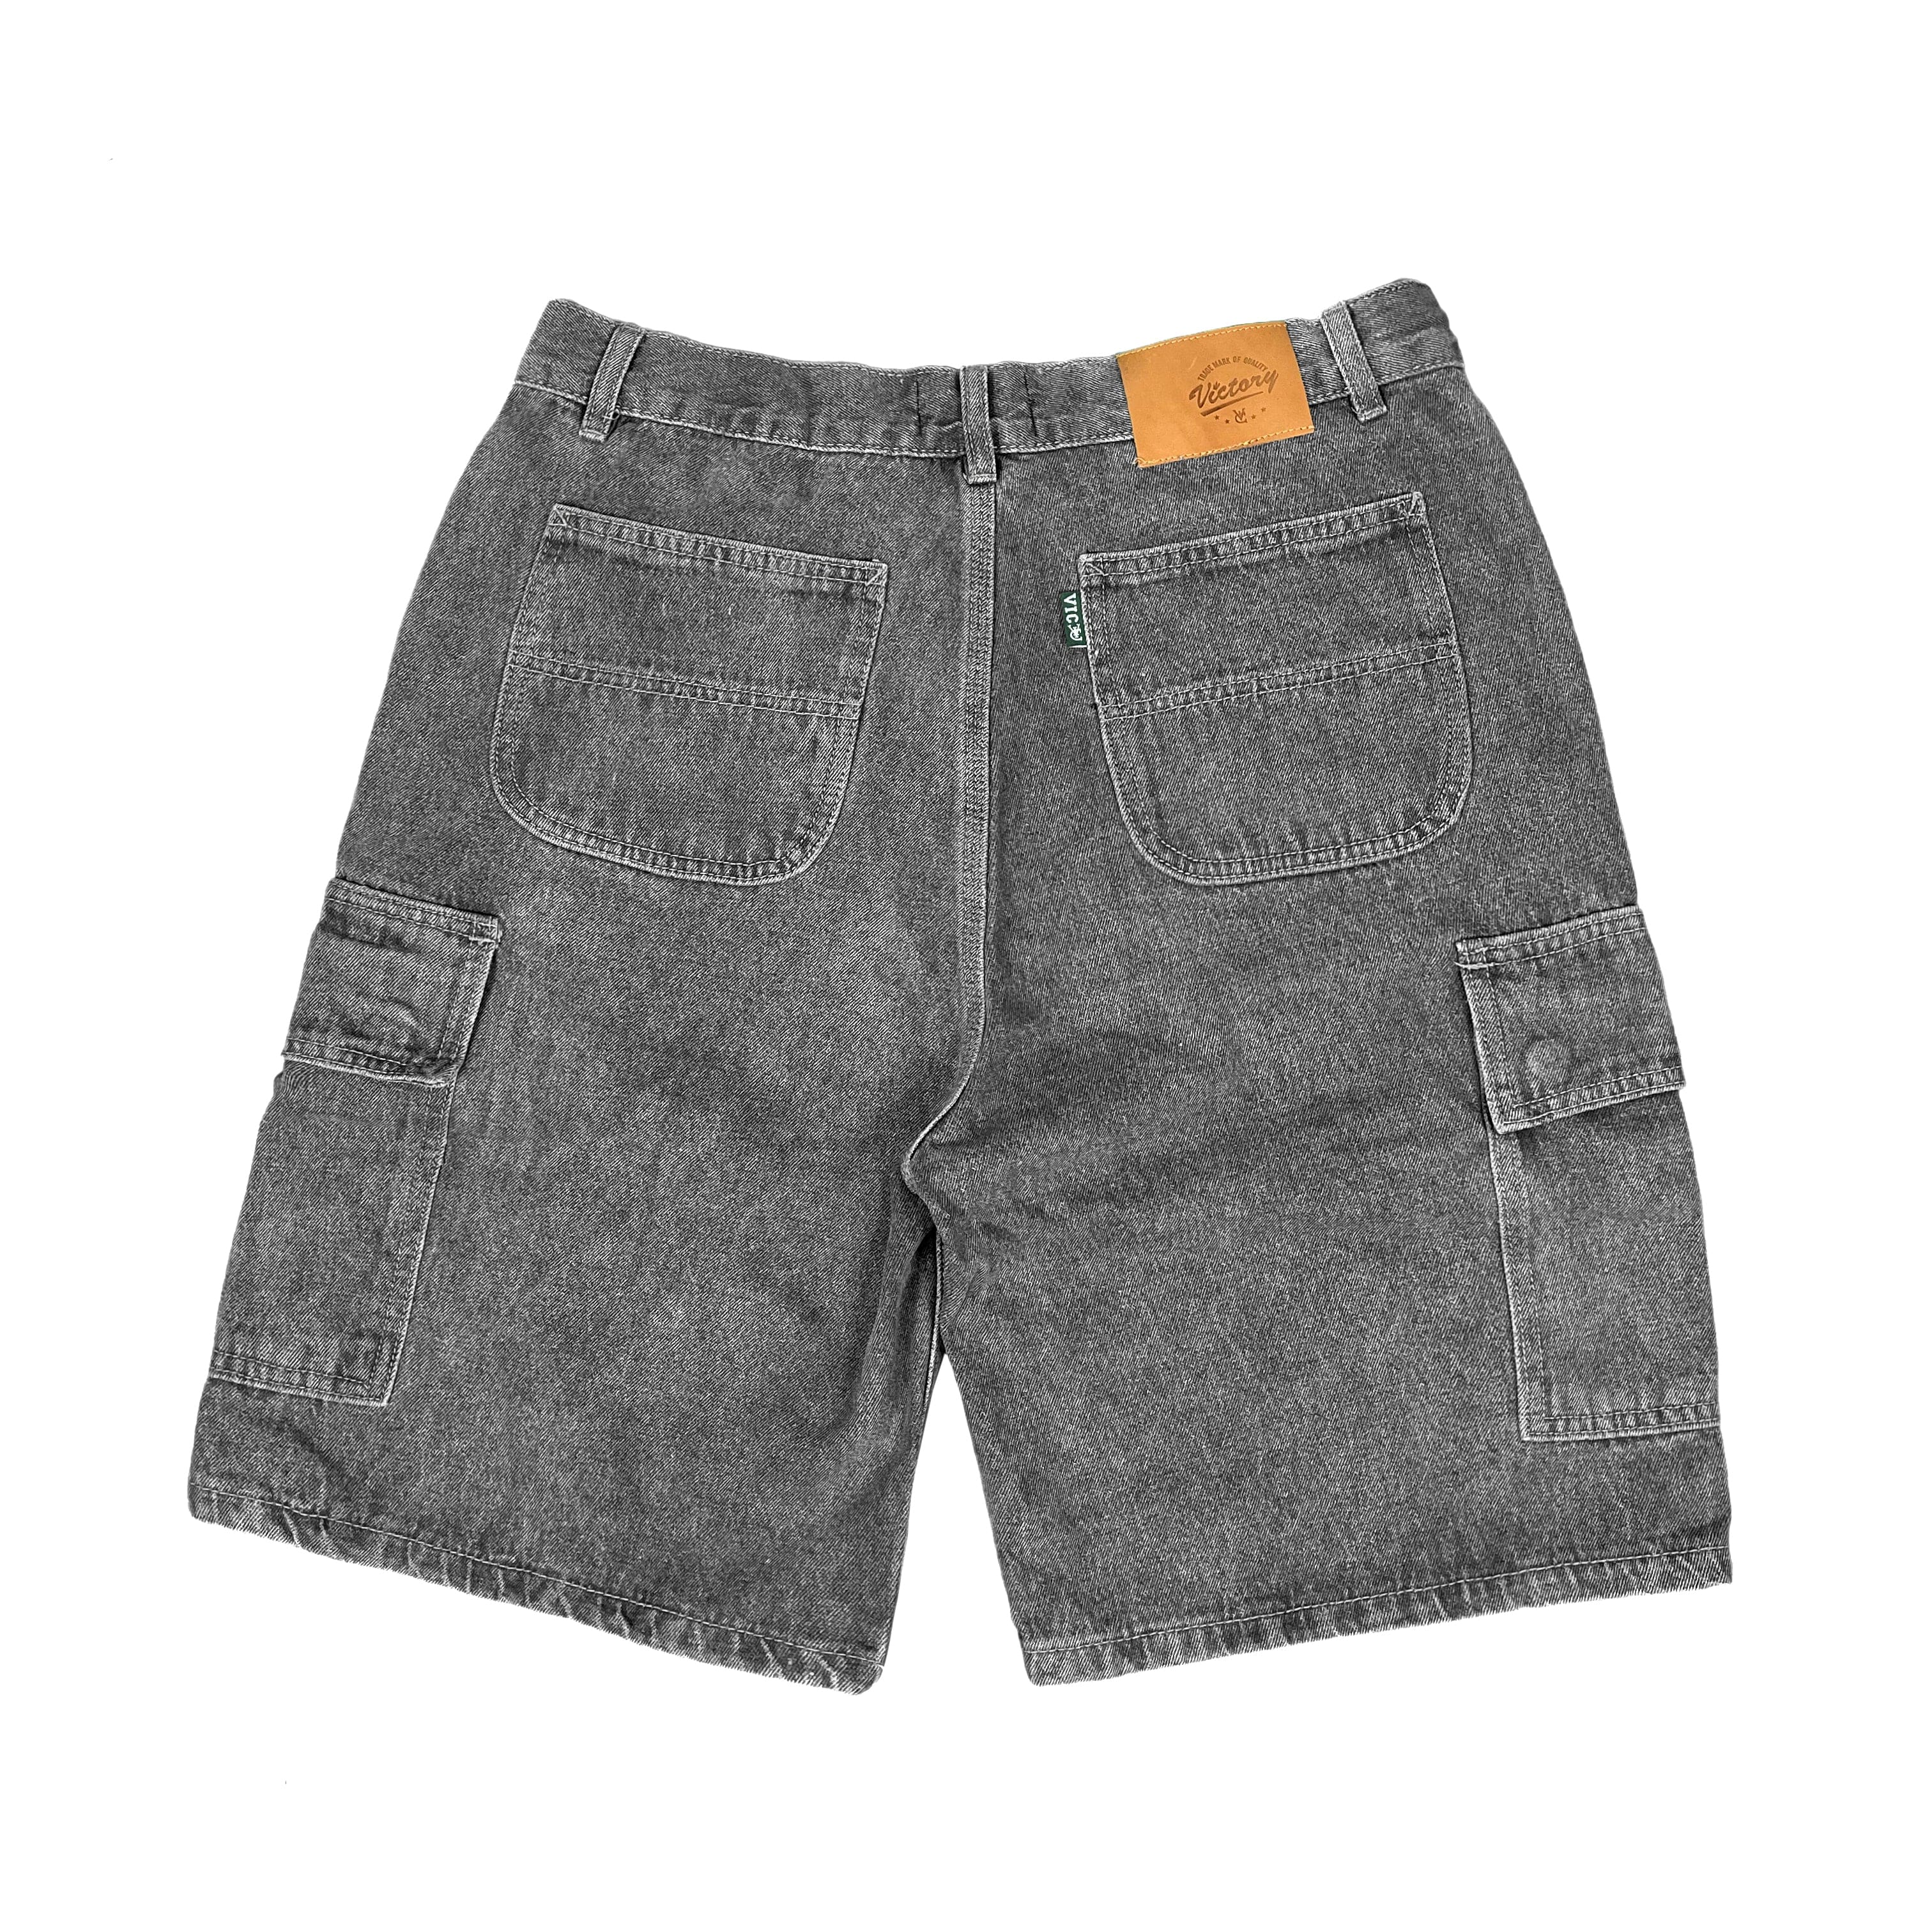 Premium quality cargo denim jean shorts by New Zealand skate and streetwear clothing label VIC Apparel. Loose fit. Featuring utility pockets and triple needle contrast stitching with VIC label flag at the back right pocket. Classic vintage workwear style. 90s baggy jorts style